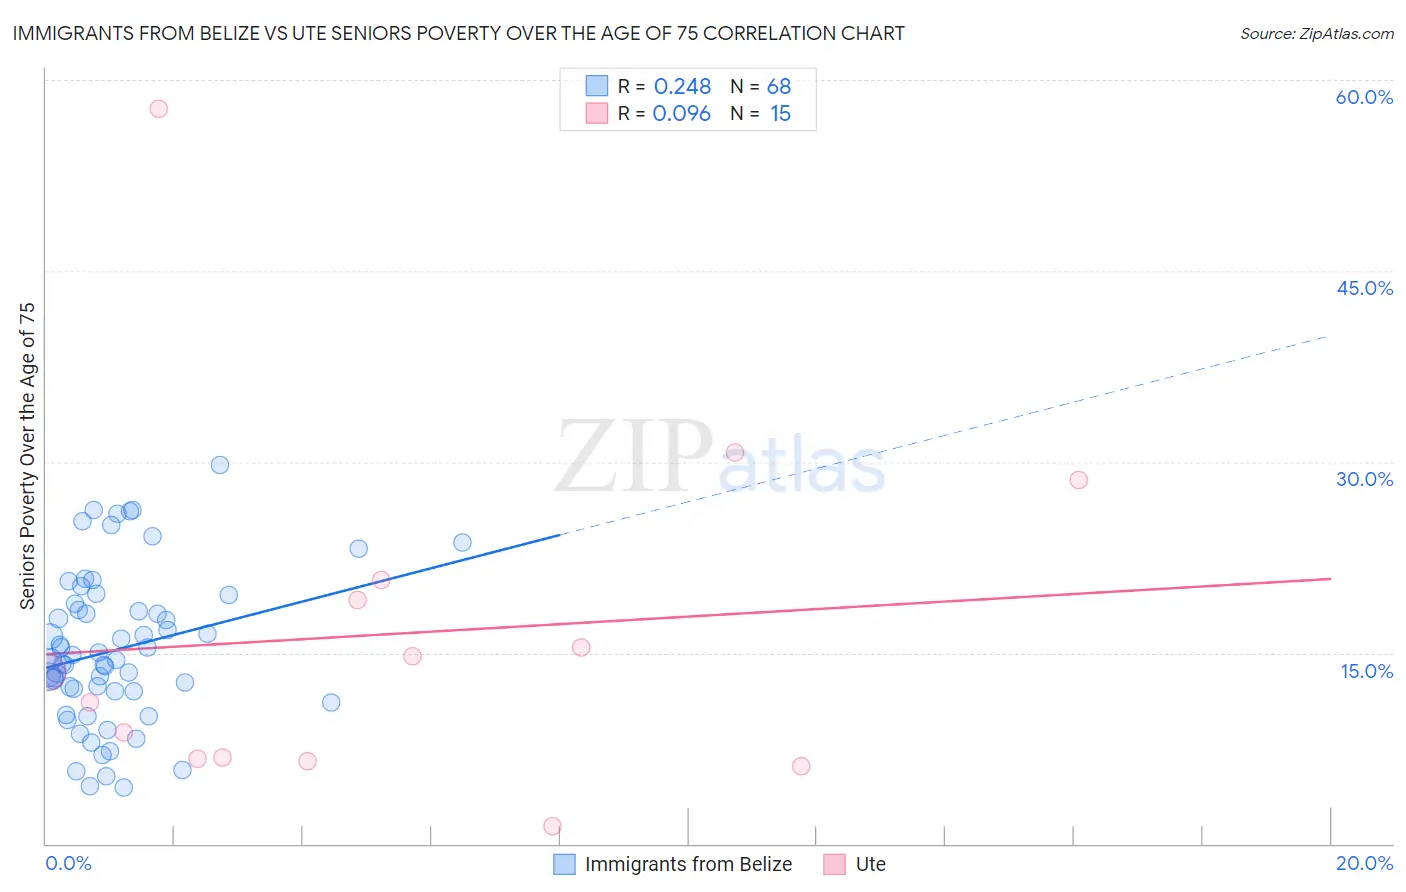 Immigrants from Belize vs Ute Seniors Poverty Over the Age of 75